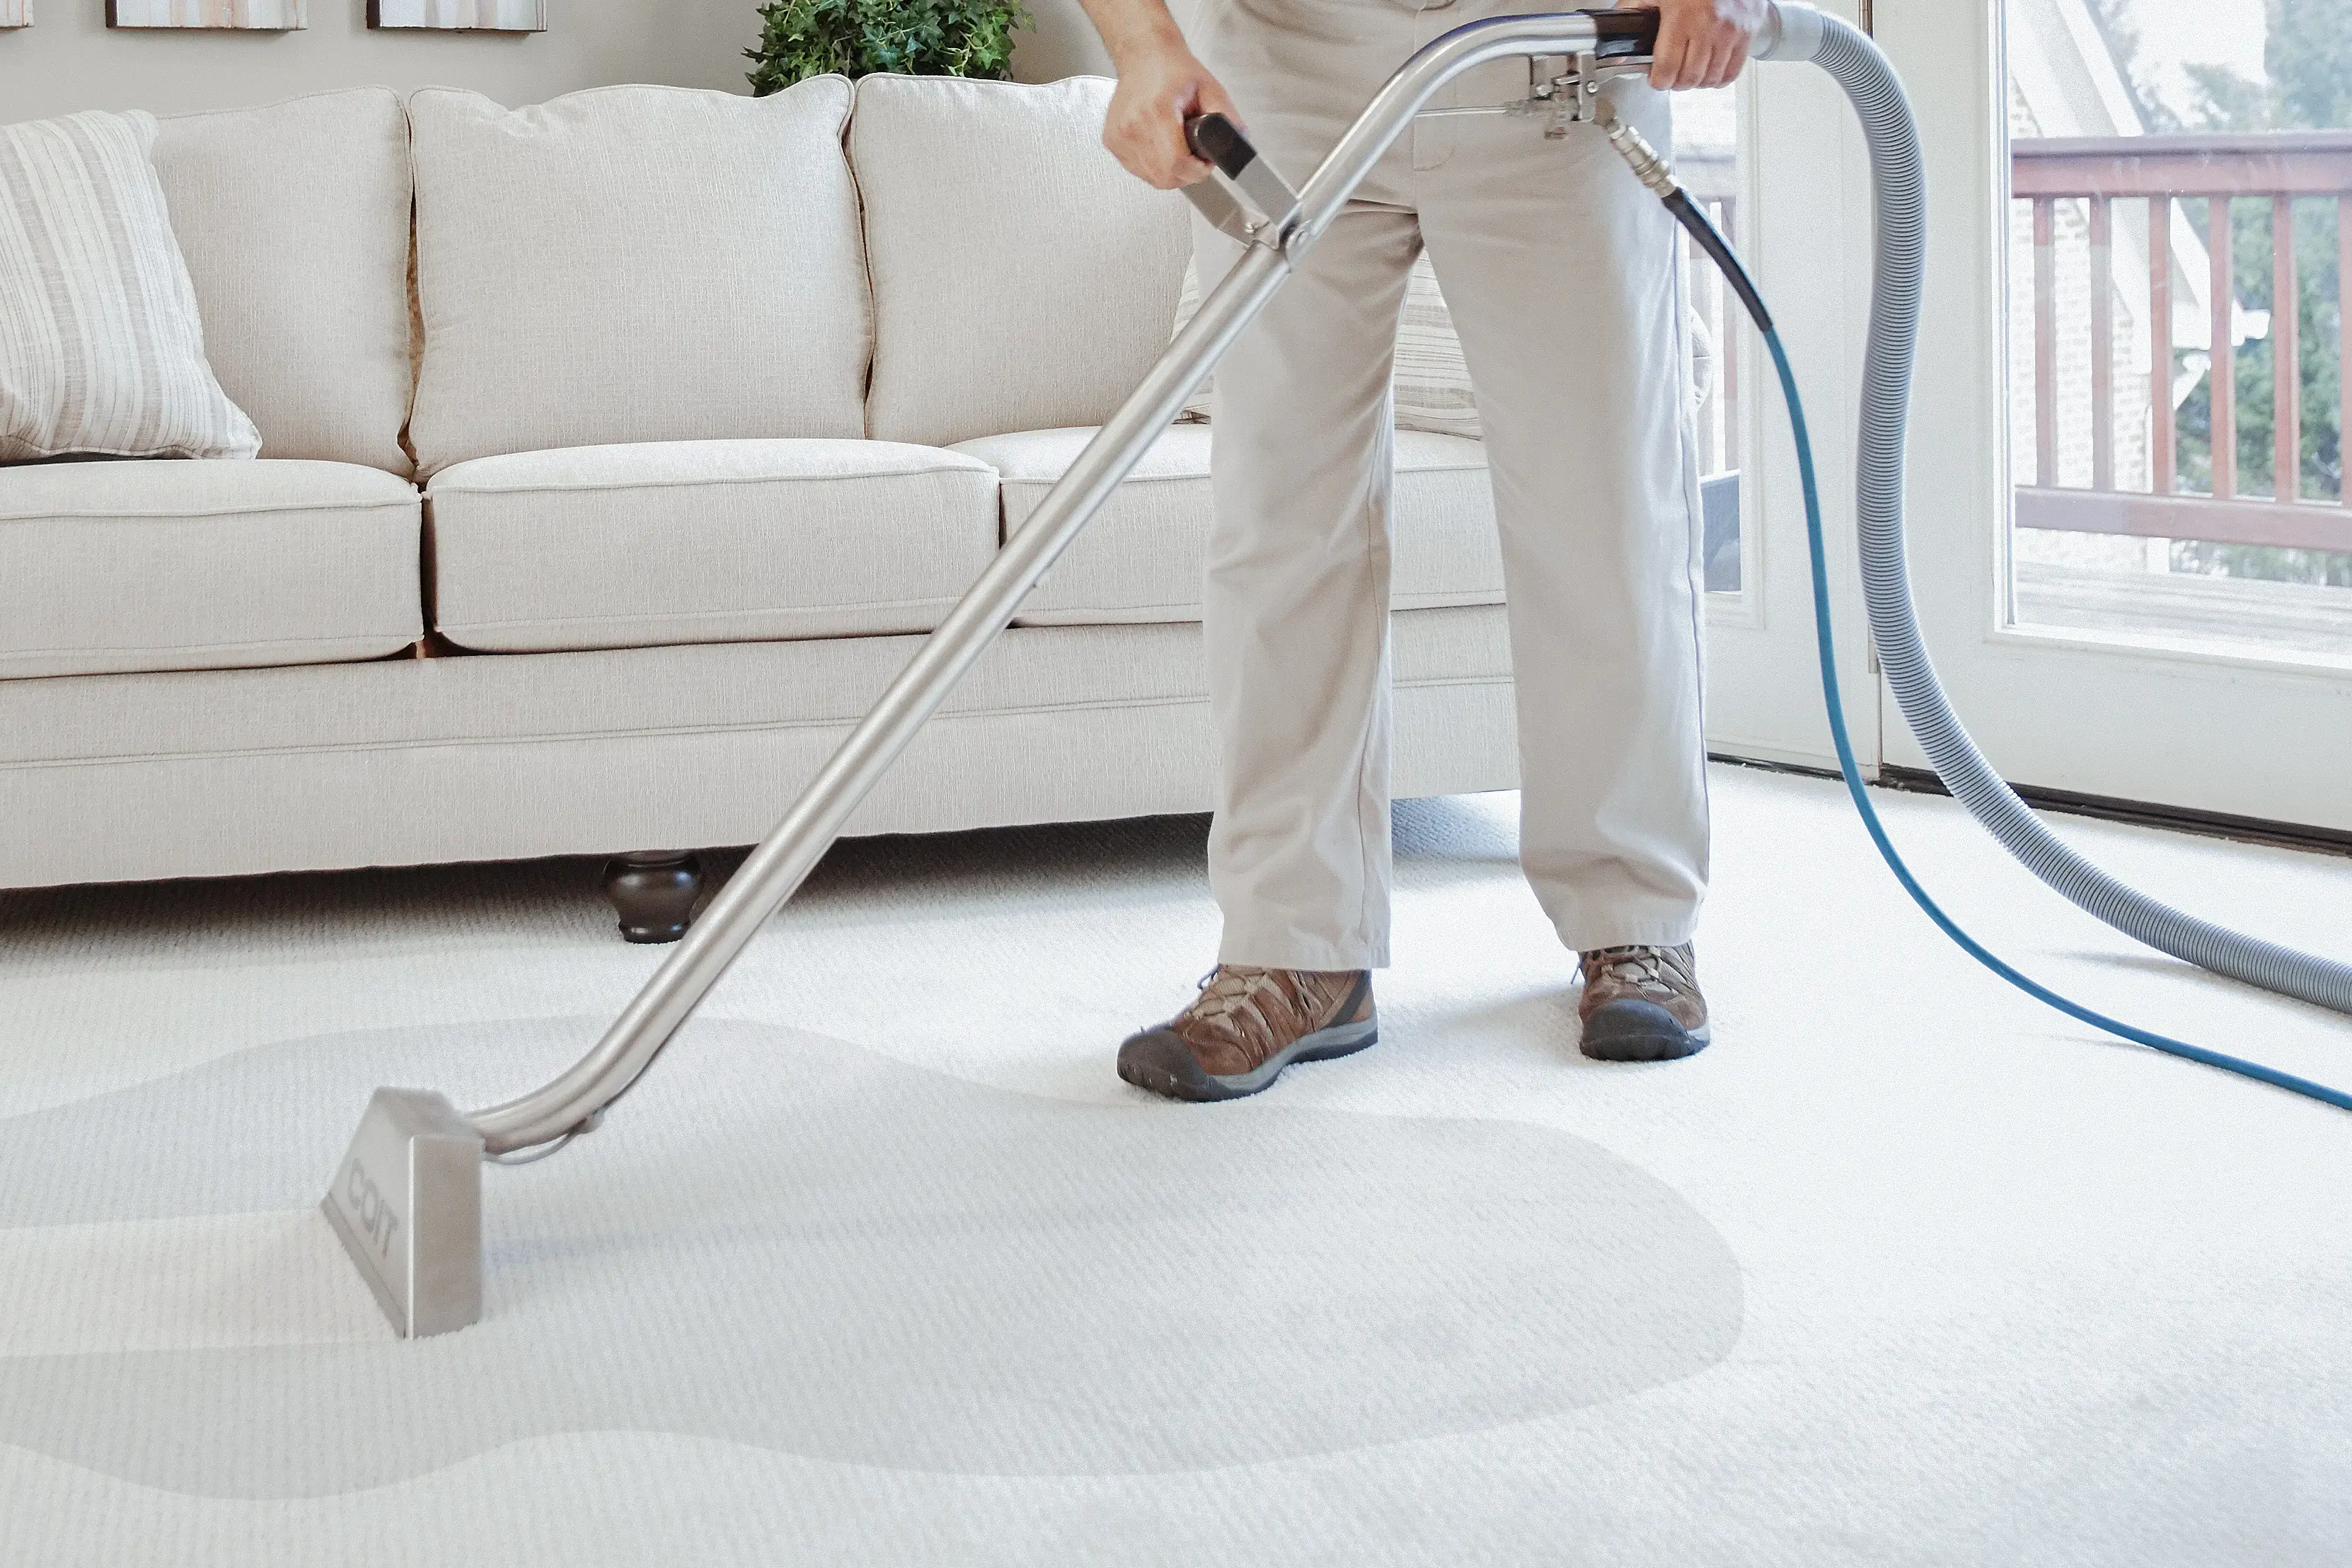 Pro-Time Cleaning Carpets